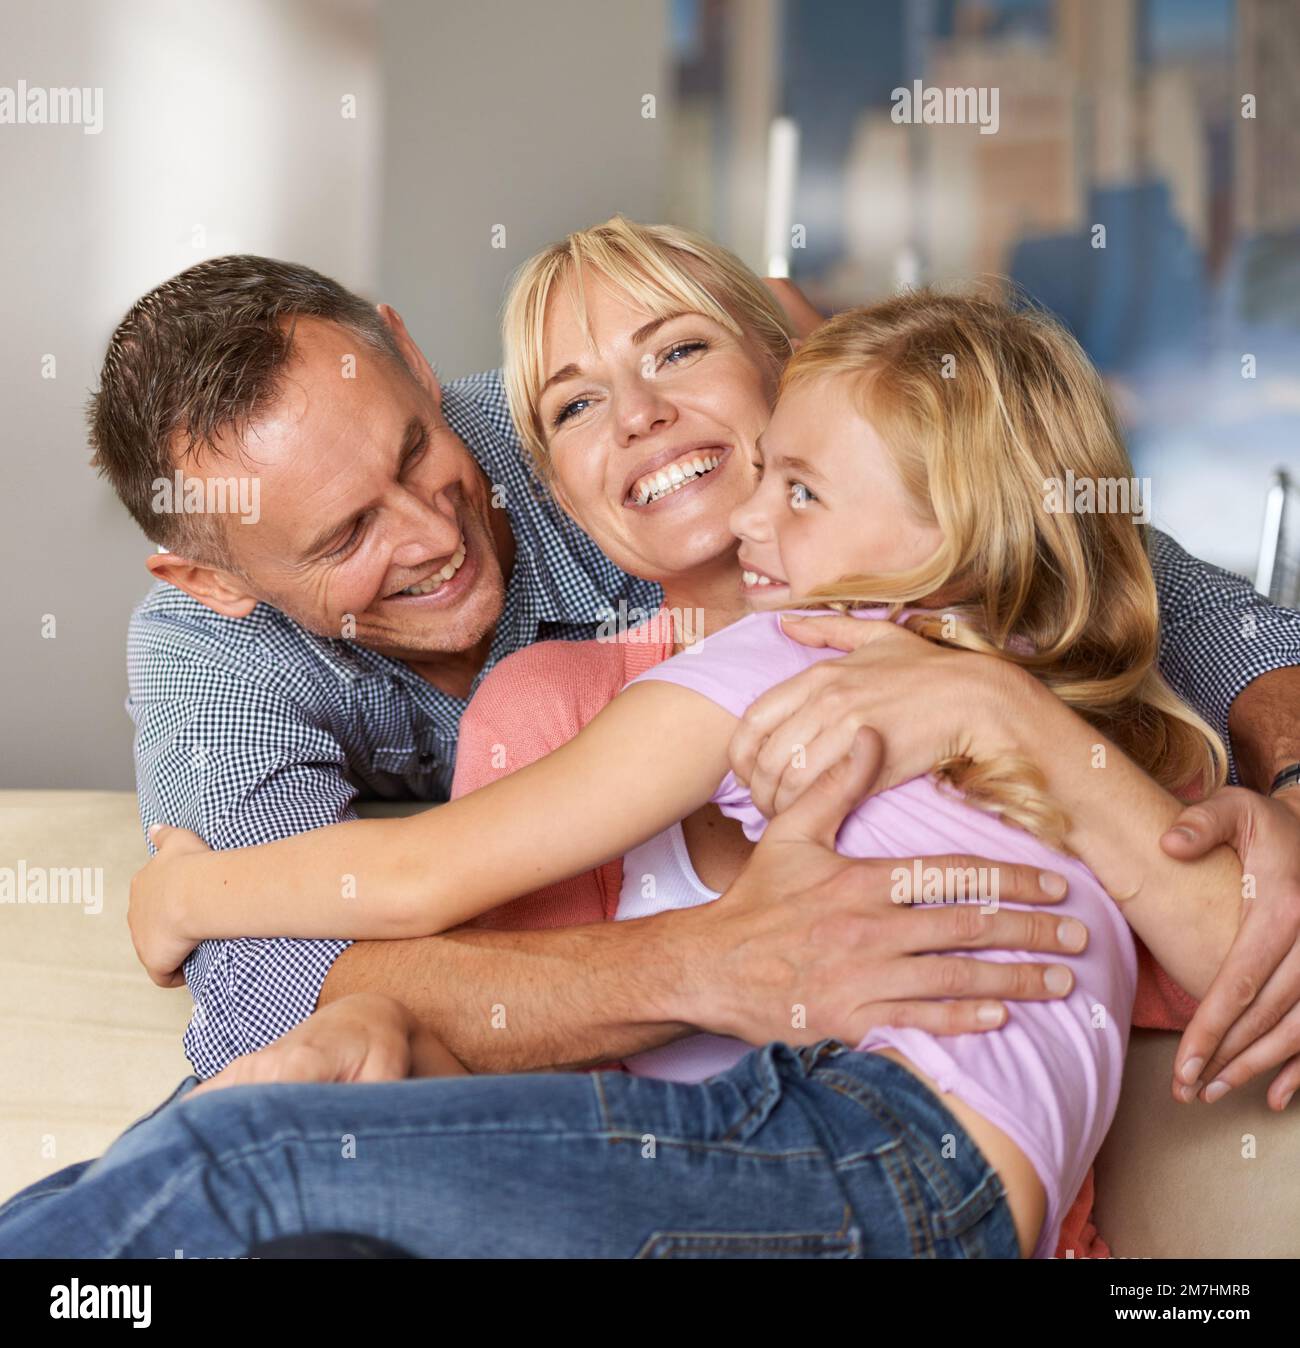 Home is definitely where the heart is. a loving family embracing each other on the sofa. Stock Photo